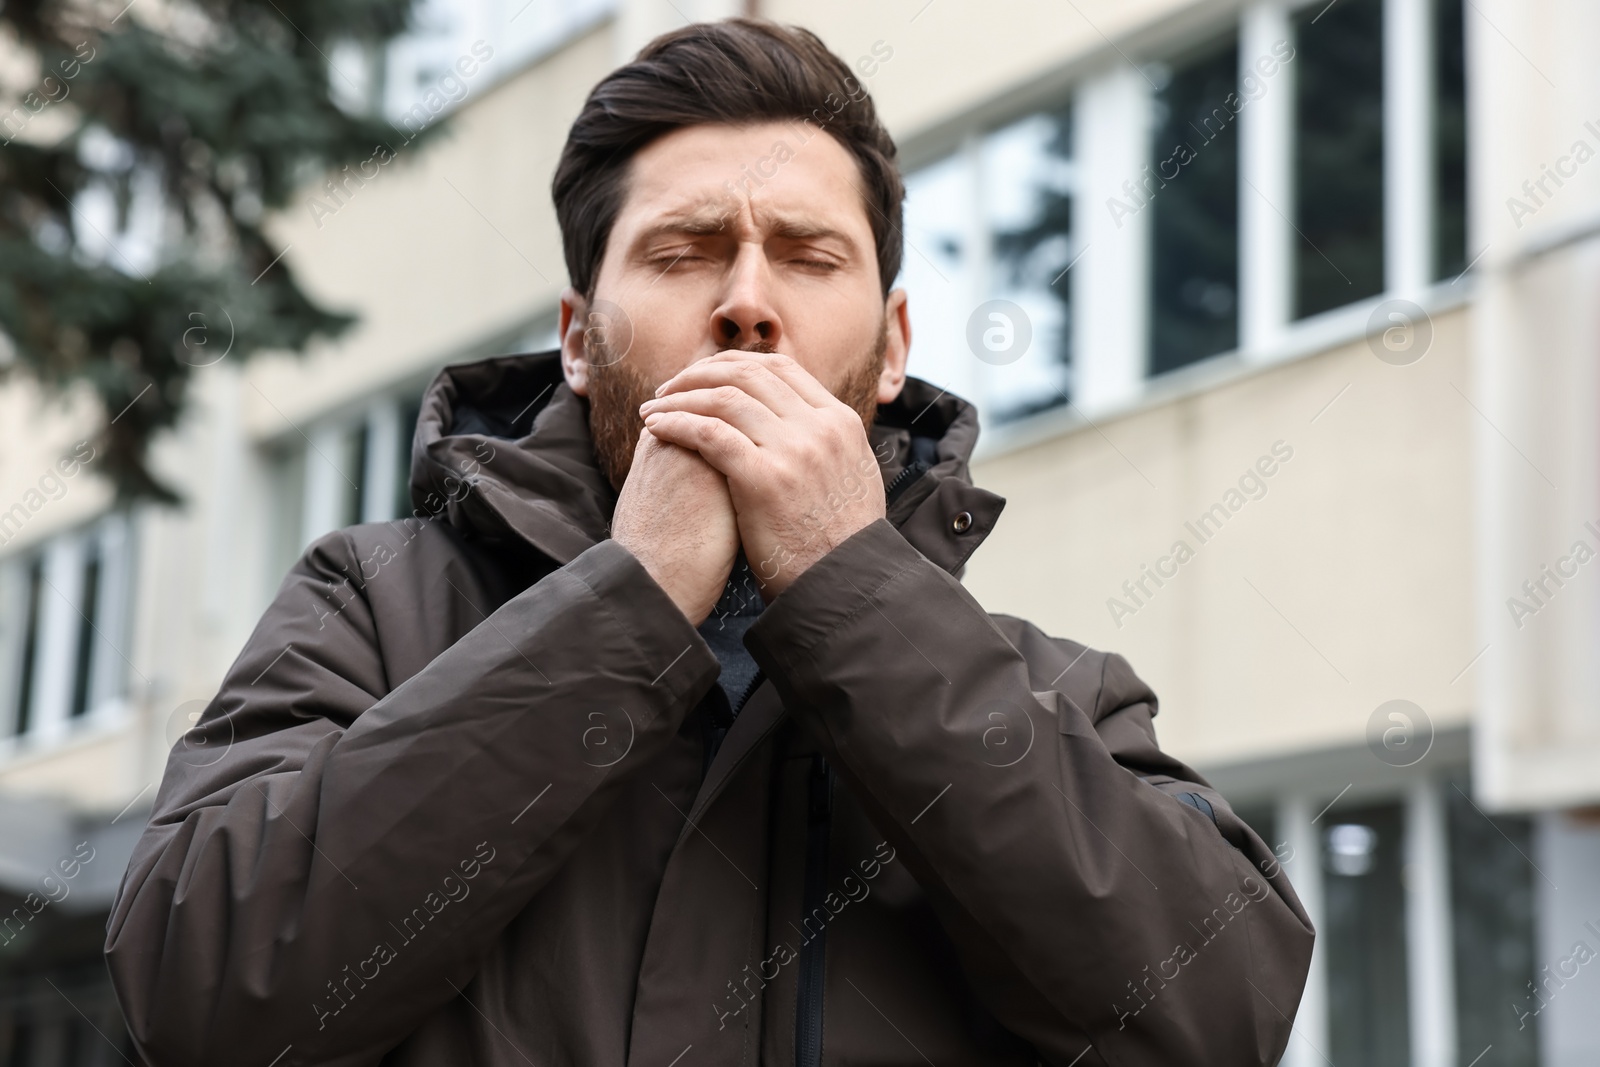 Photo of Sick man coughing on city street. Cold symptoms